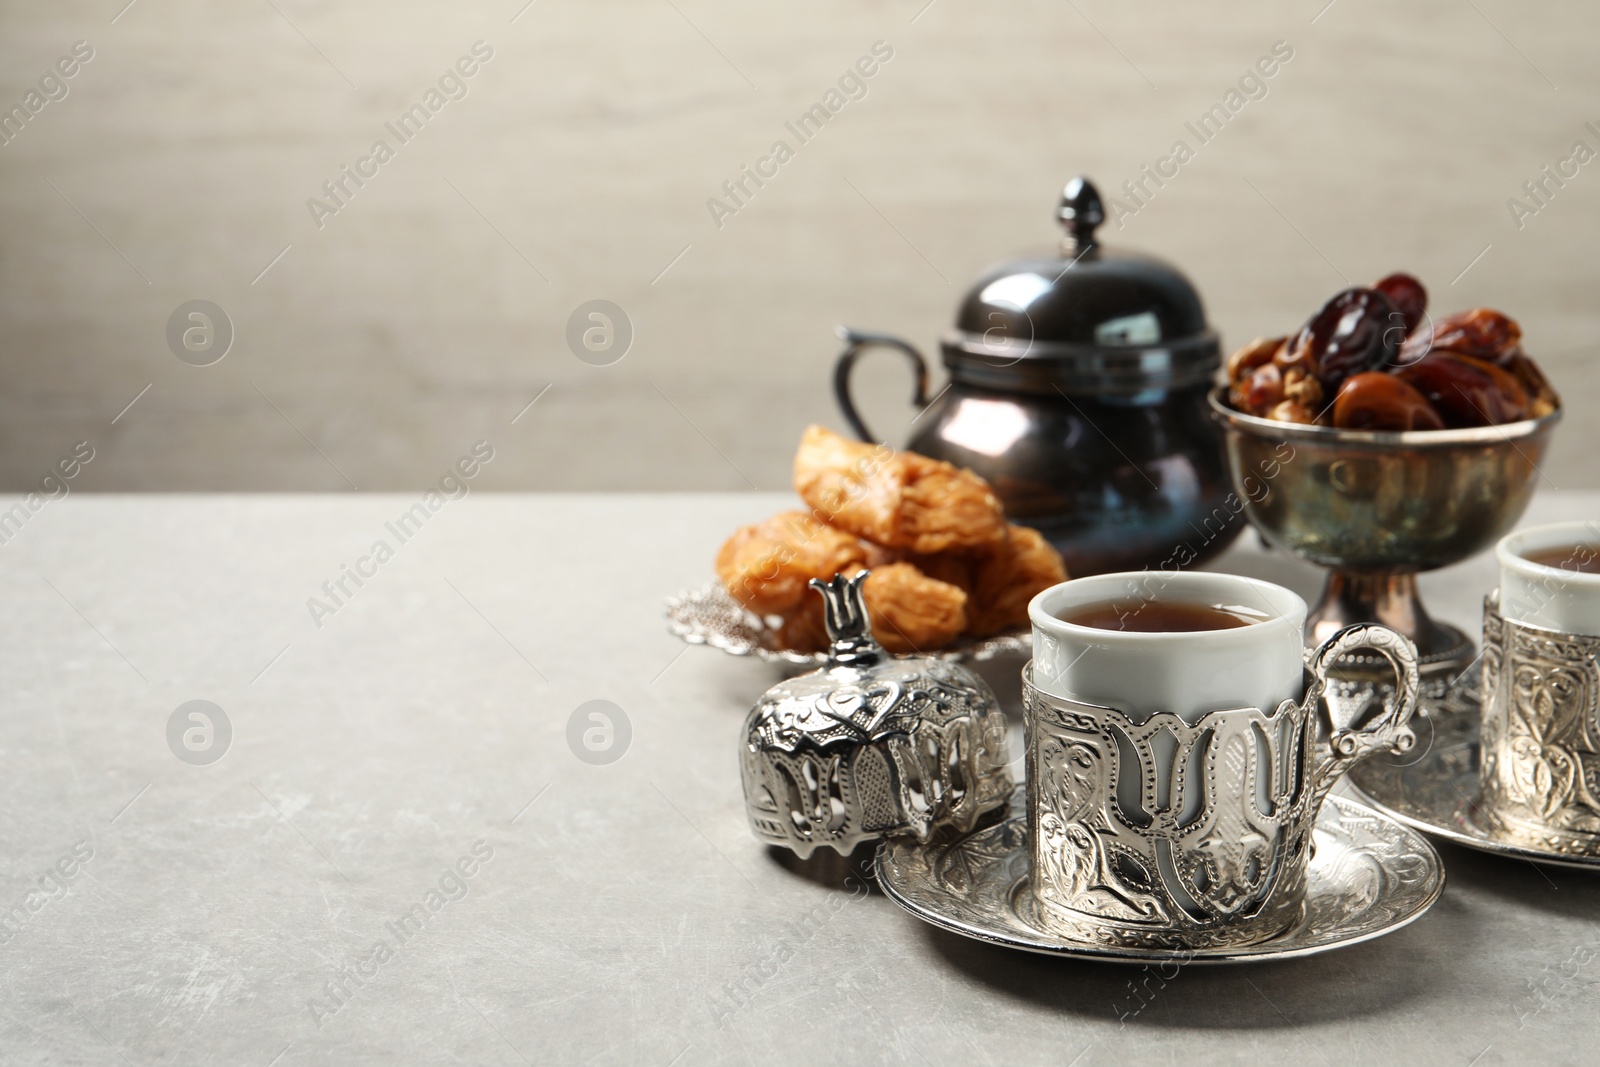 Photo of Tea, baklava dessert and date fruits served in vintage tea set on grey table, space for text